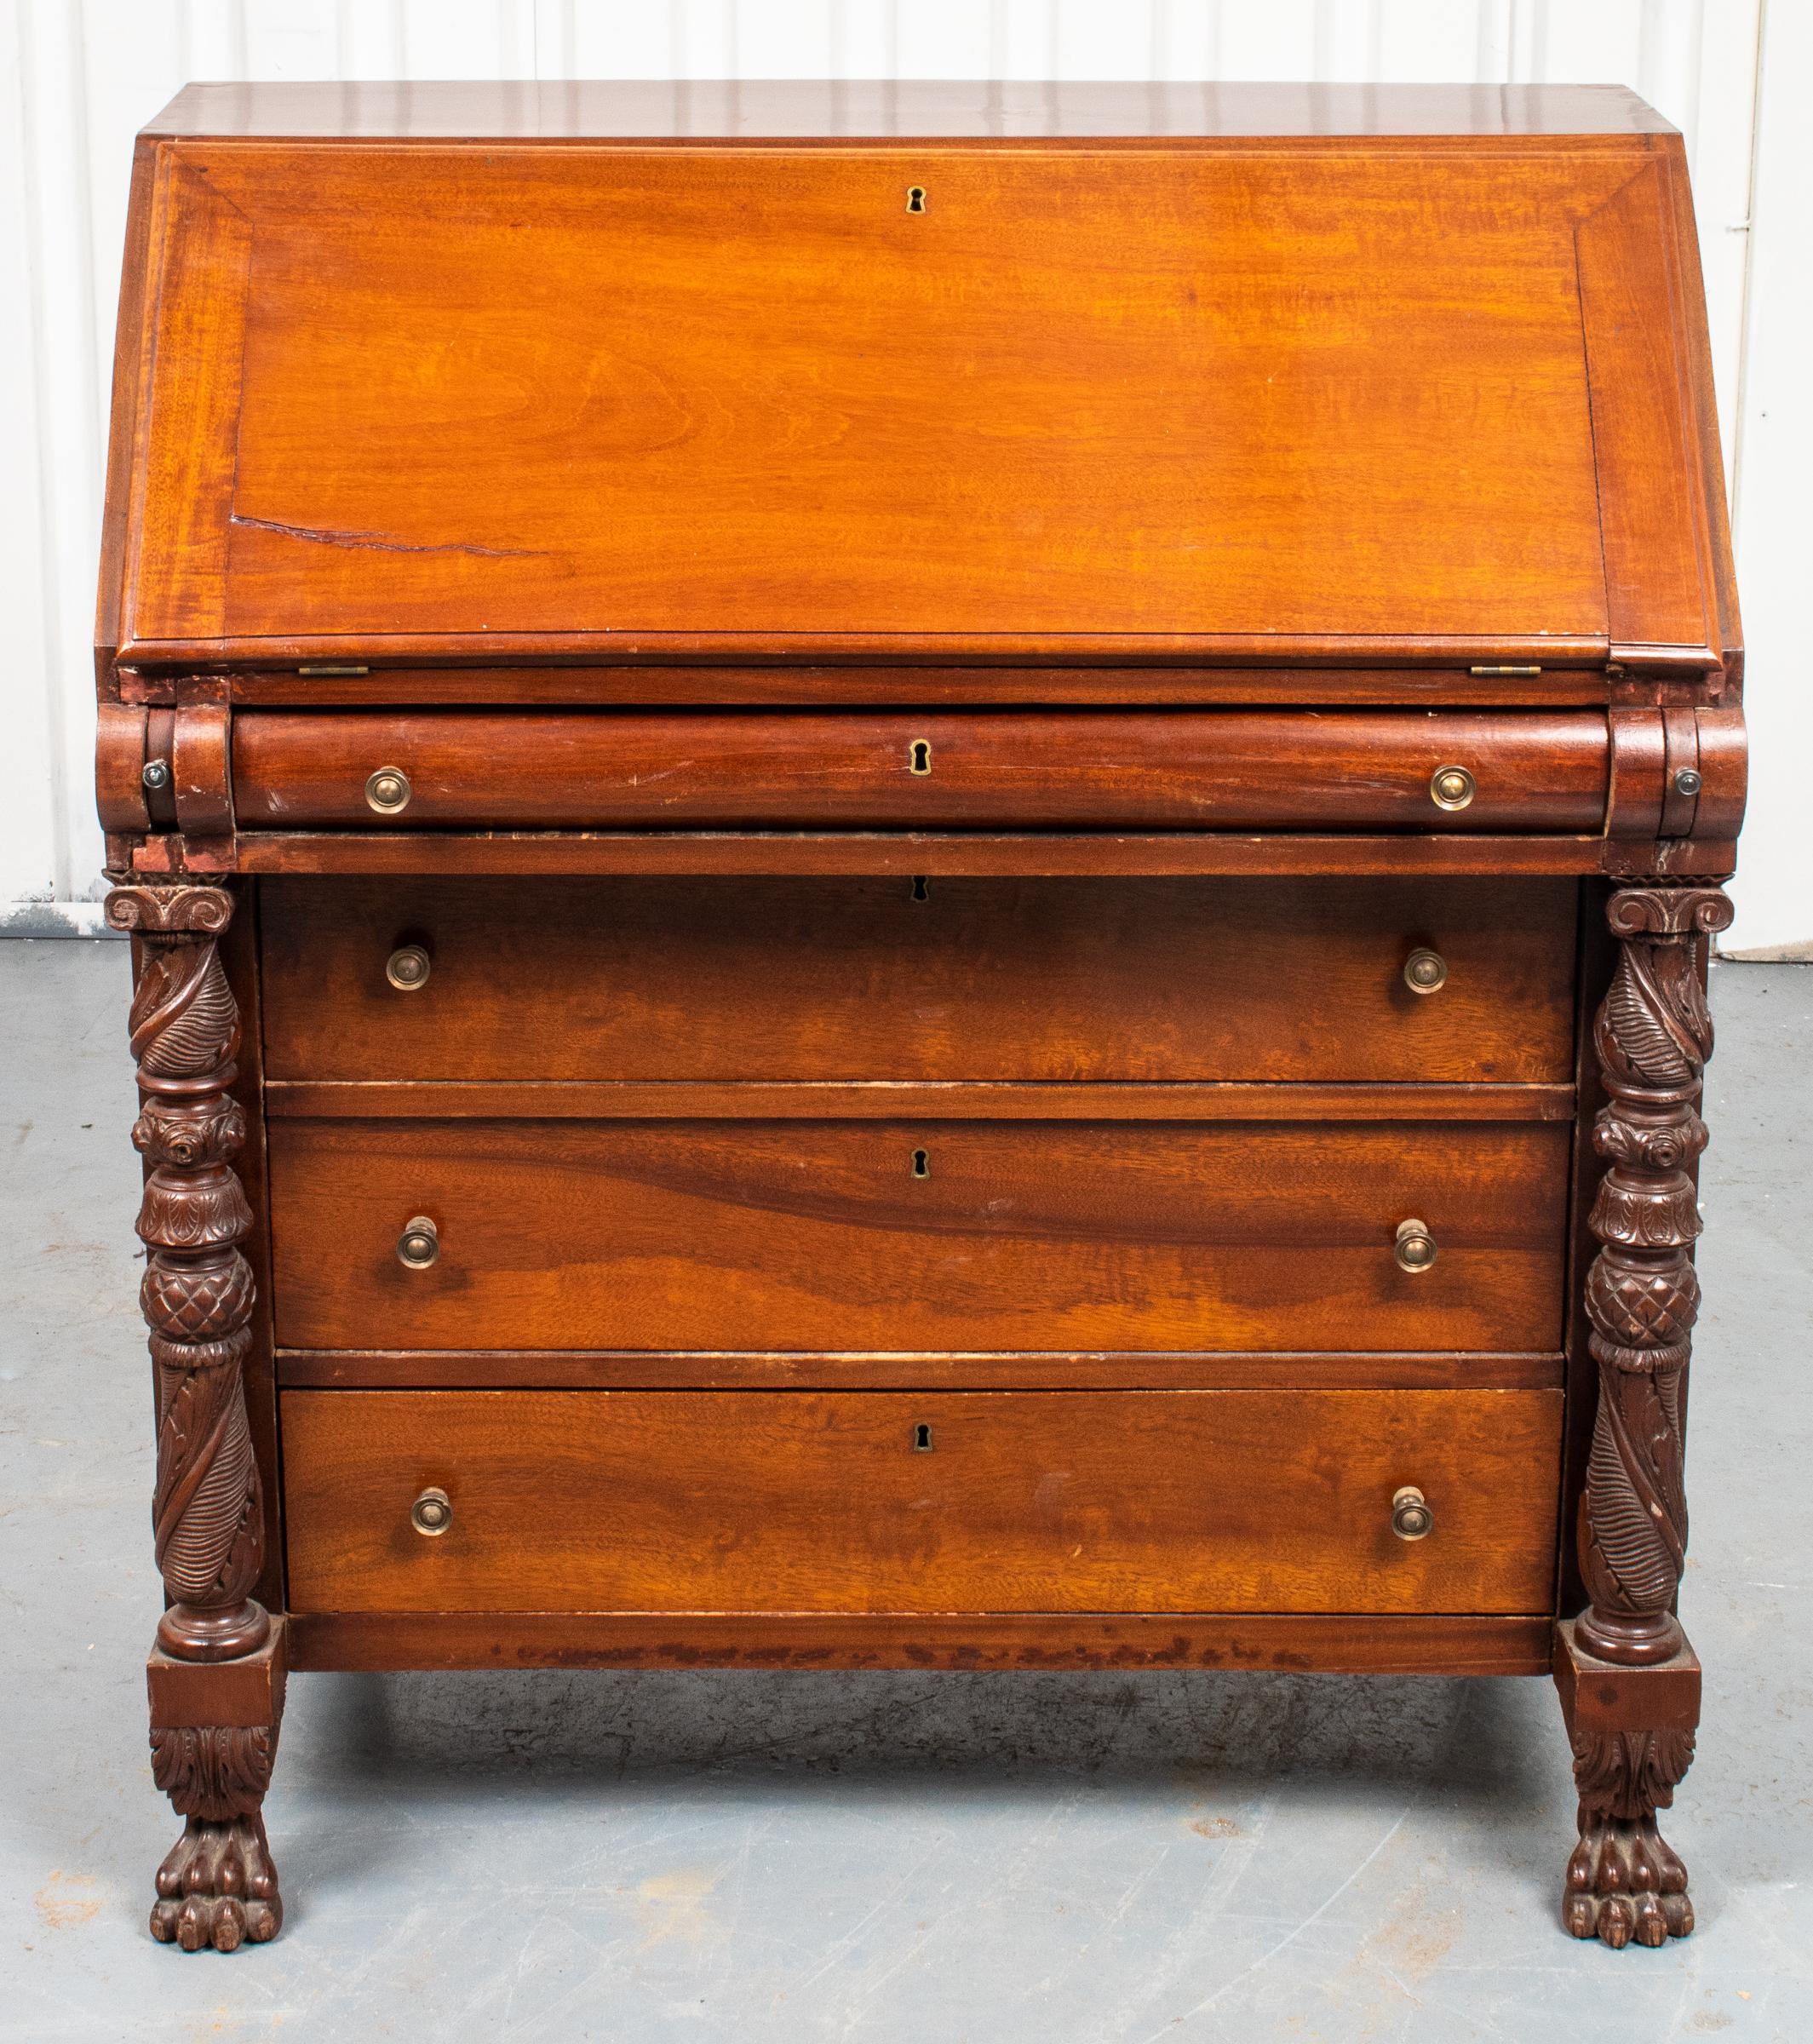 Caribbean Colonial style mahogany slant front secretary, in the late Classical taste, two columns carved with pineapple and palm leaf motifs flanking the three drawers beneath the slant front writing desk. Measures: 41” H x 36” W x 19” D.